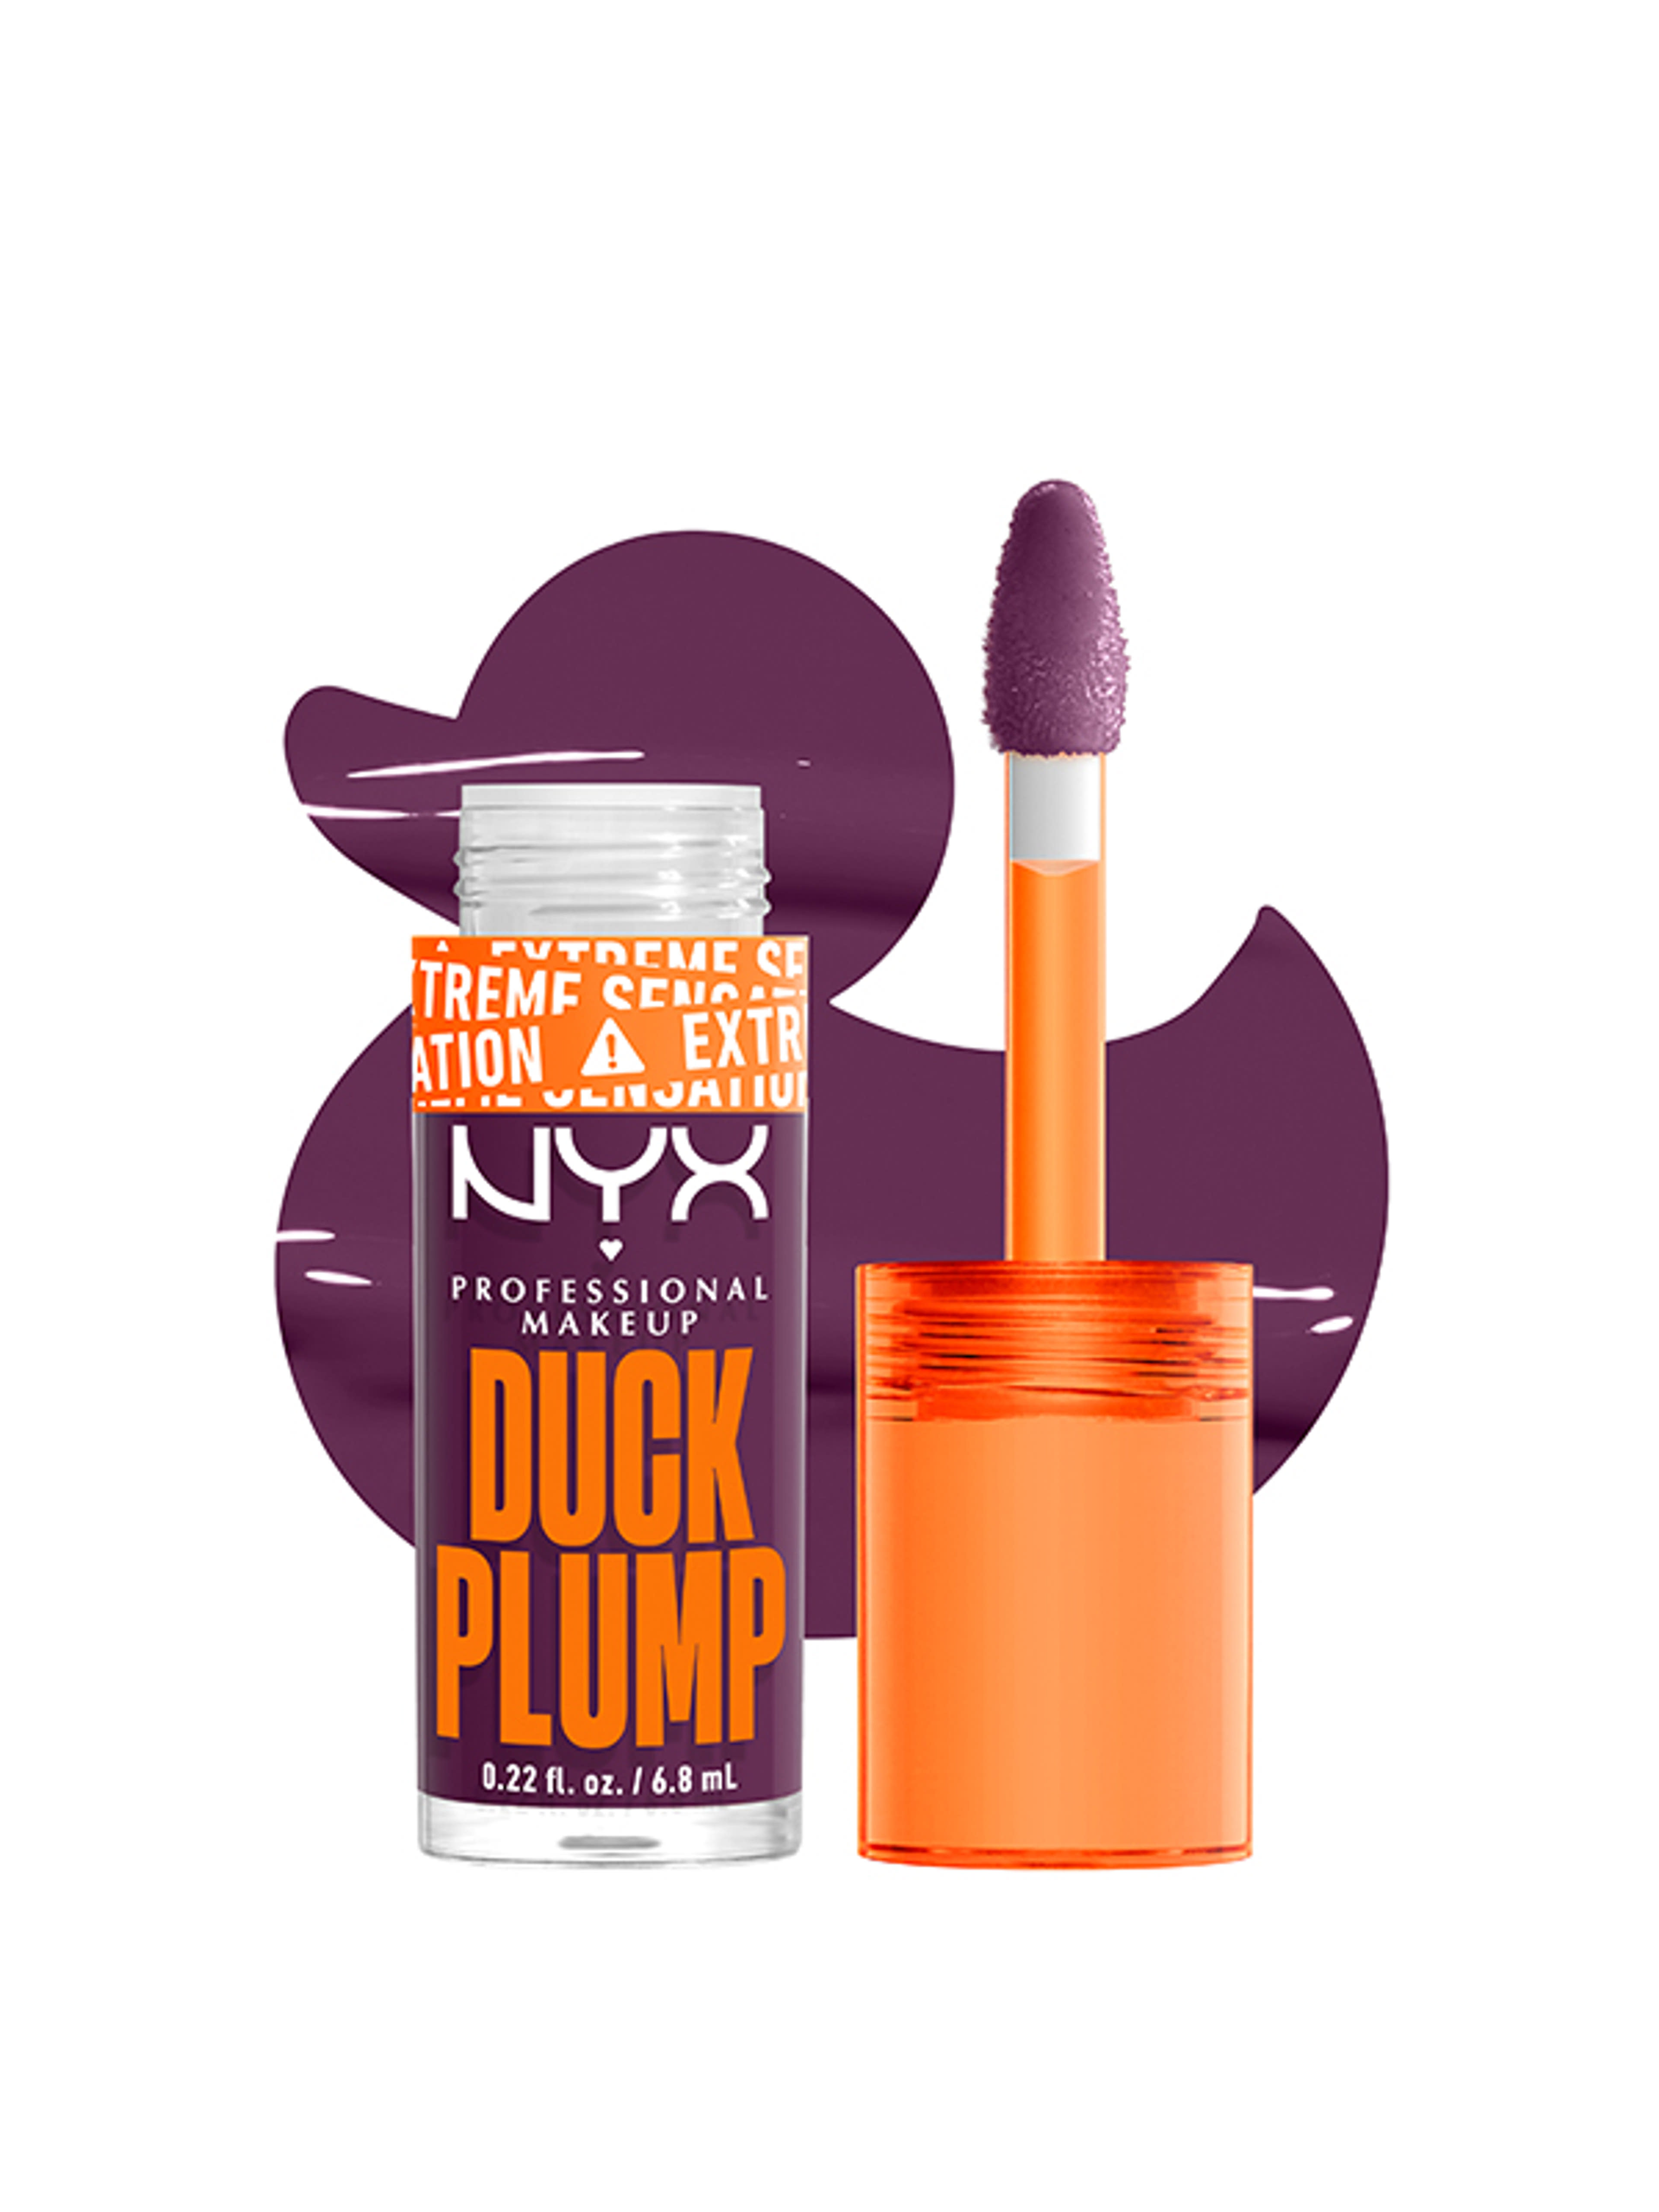 NYX Professional Makeup Duck Plump ajakfény /pure plump - 1 db-4